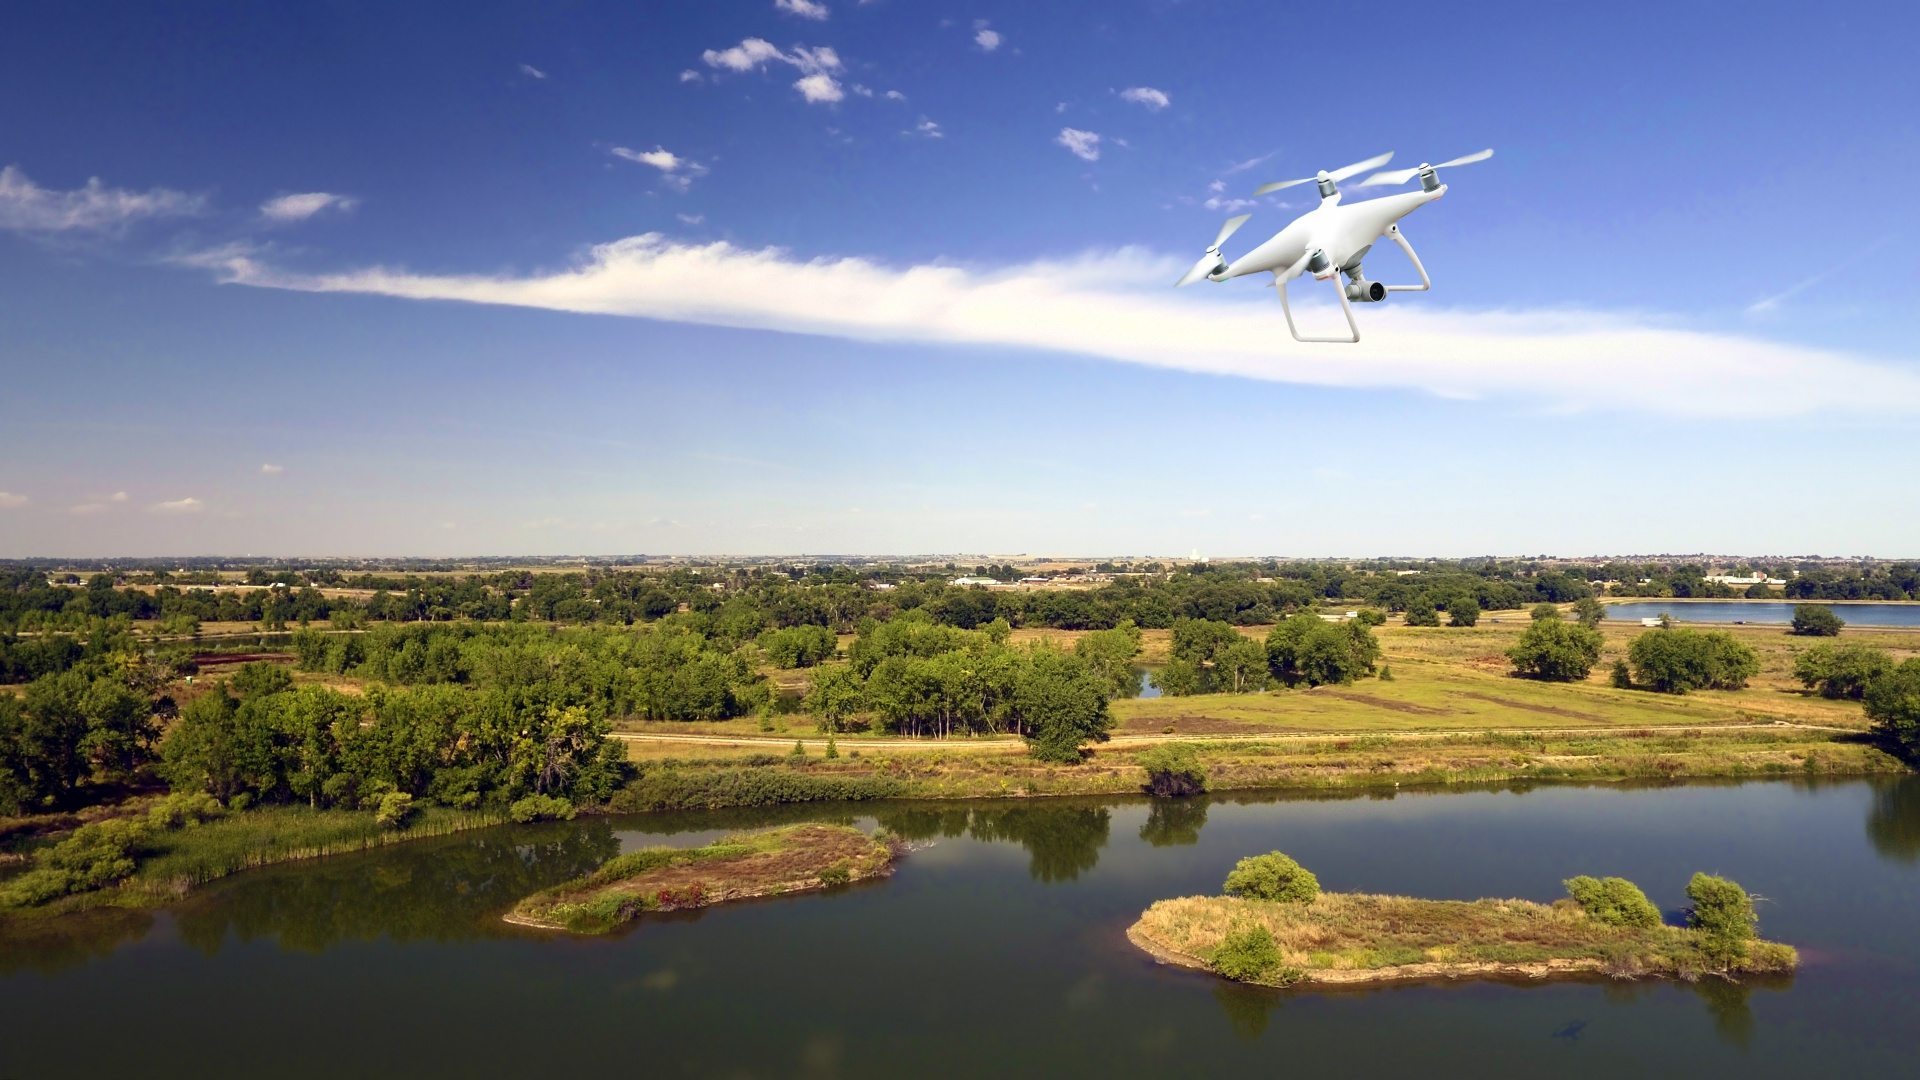 Flytrex is using drones for different purposes, such as delivering packages